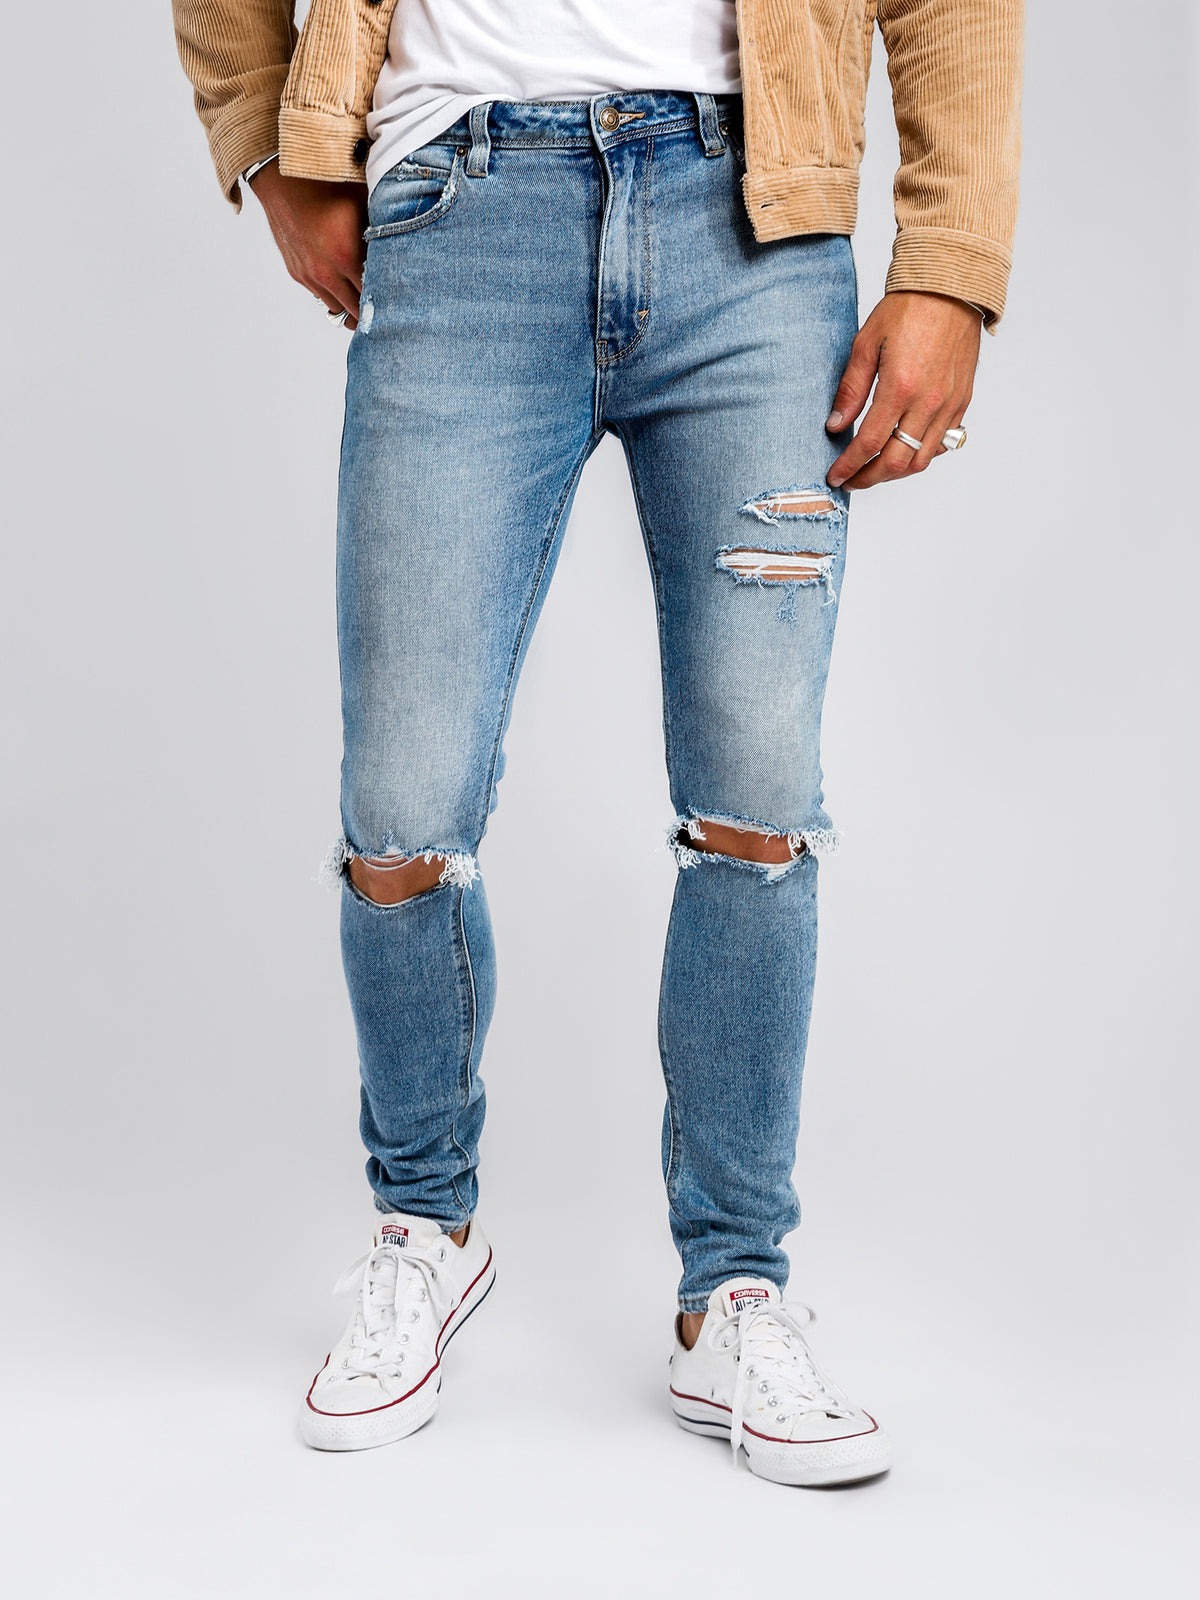 A Dropped Skinny Turn Up Jean in Scuzz Blues Denim